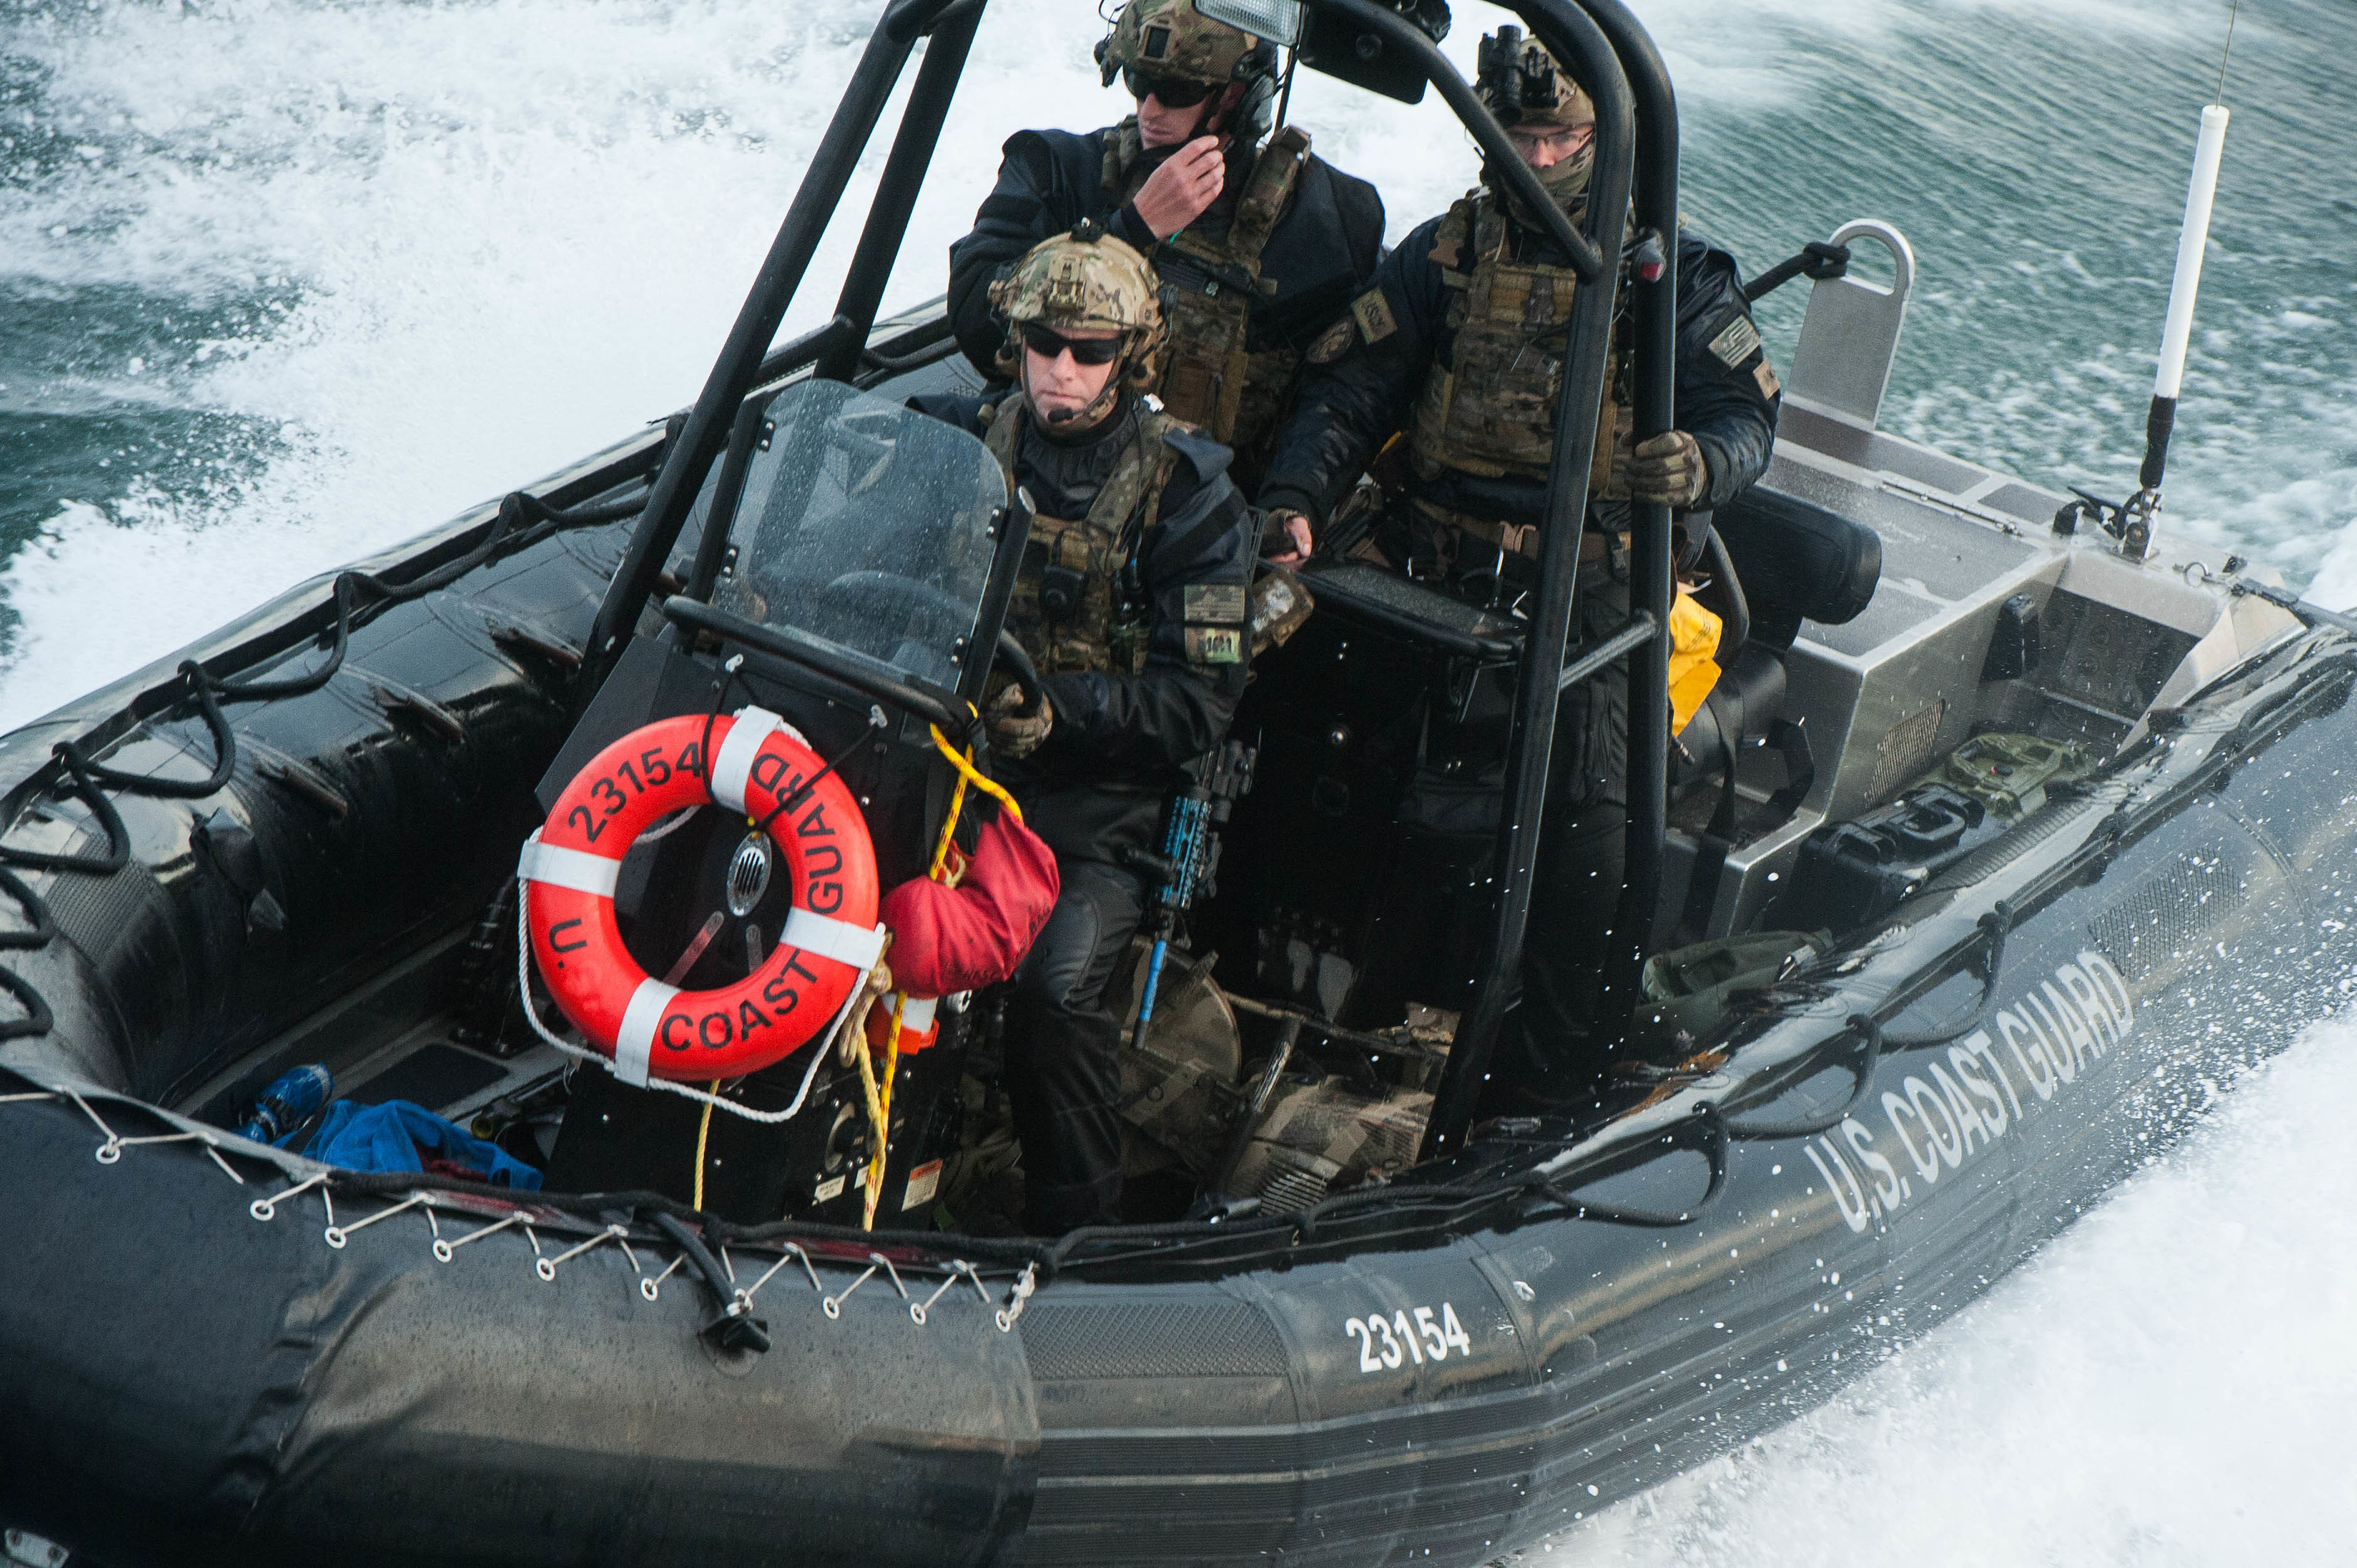 The Coast Guard’s Maritime Security Response Team (MSRT) from Virginia participates in a training evolution in Hyannis, Mass., Thursday, Oct. 22, 2015. The highly trained and specialized team, using a real-world underway ferry, practiced tactical boardings-at-sea, active shooter scenarios, and detection of radiological material. U.S. Coast Guard photo by Petty Officer 3rd Class Ross Ruddell